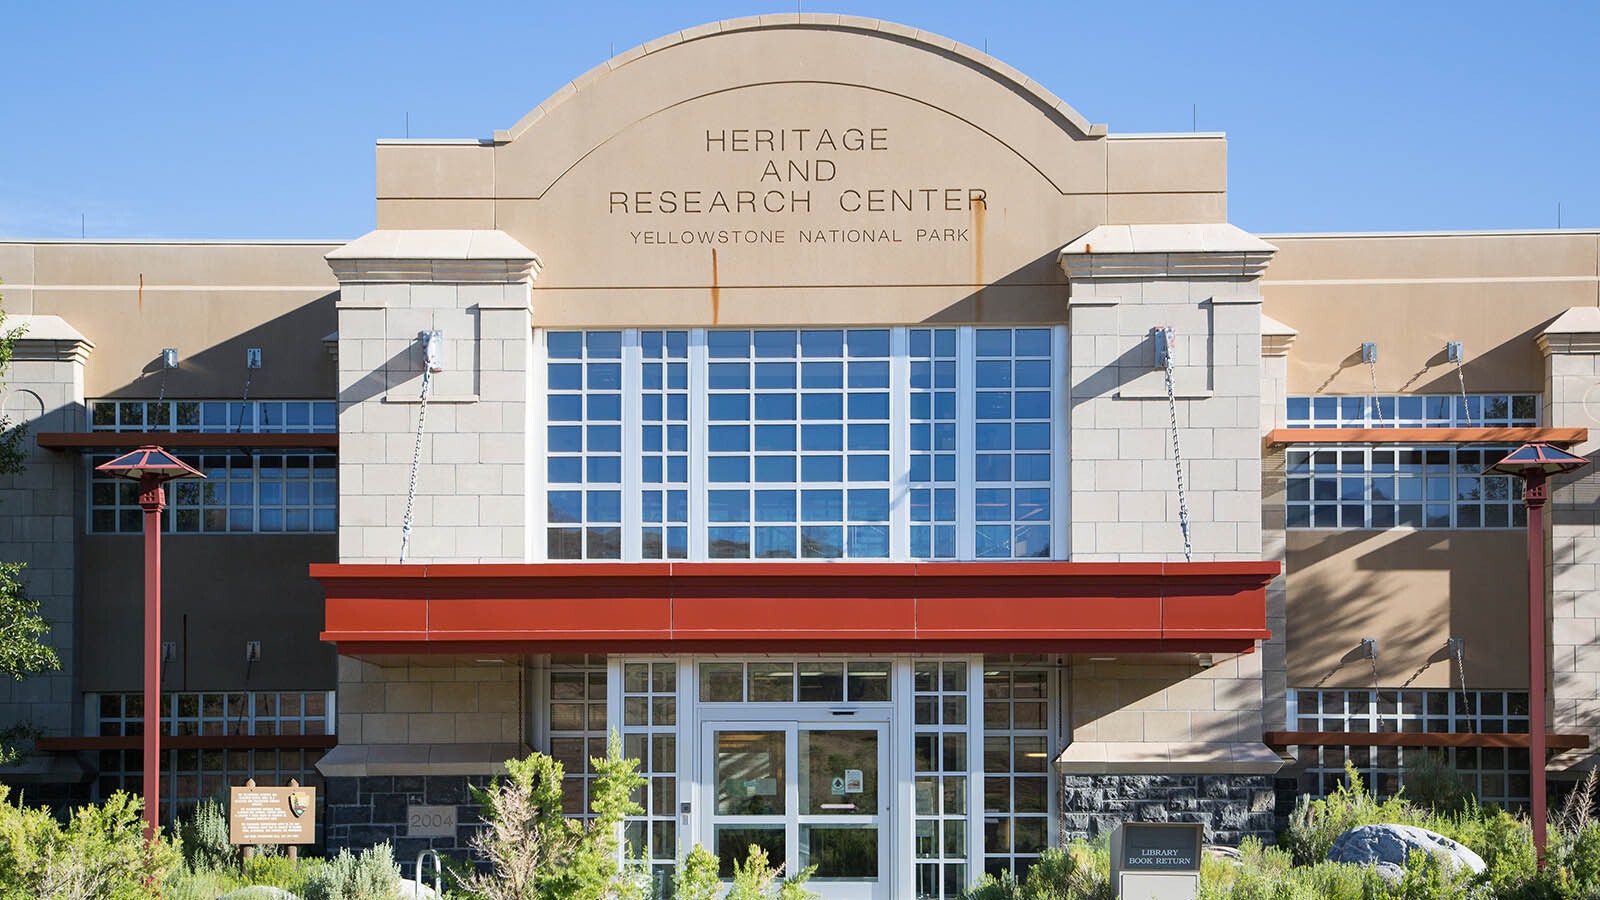 The Yellowstone Heritage and Research Center is a museum, library and historical repository all in one. It's filled with interesting and important artifacts from the nation's first national park.